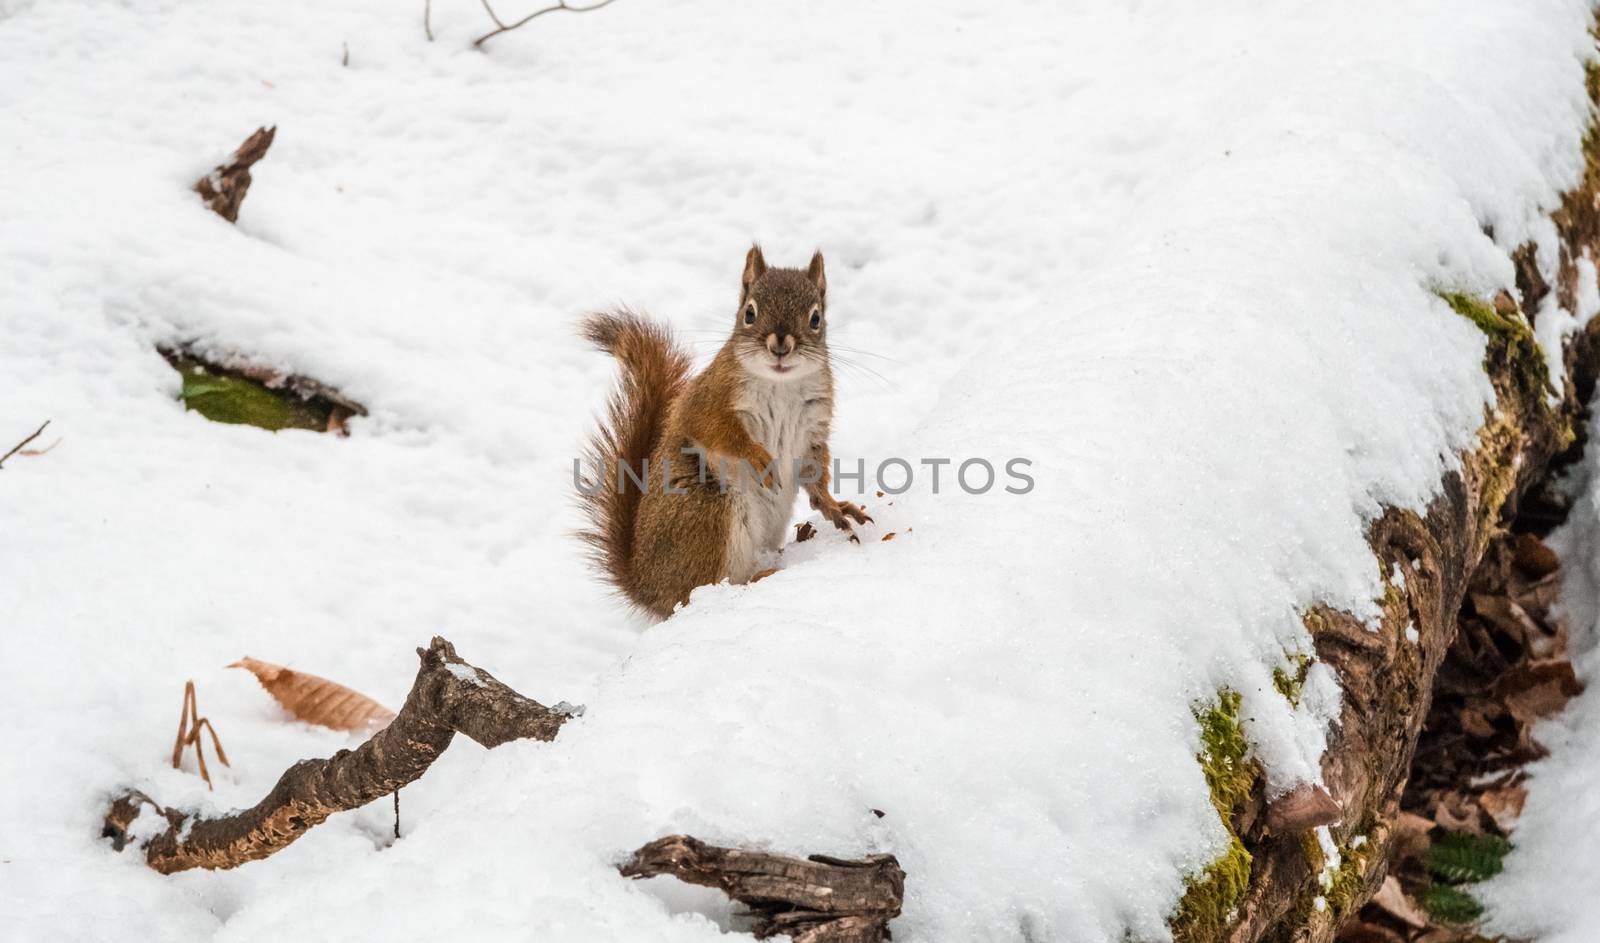 Squirrel in the snow intrigued by camera  by fpalaticky